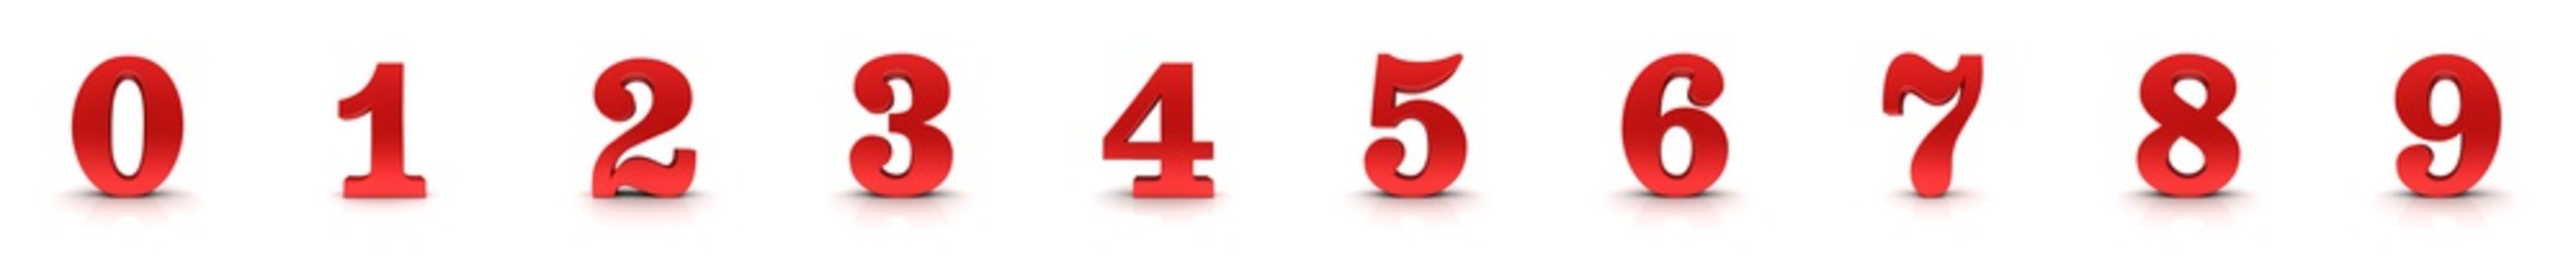 Red numbers 0 1 2 3 4 5 6 7 8 9 signs 3d zero one two three four five six seven eight nine countdown